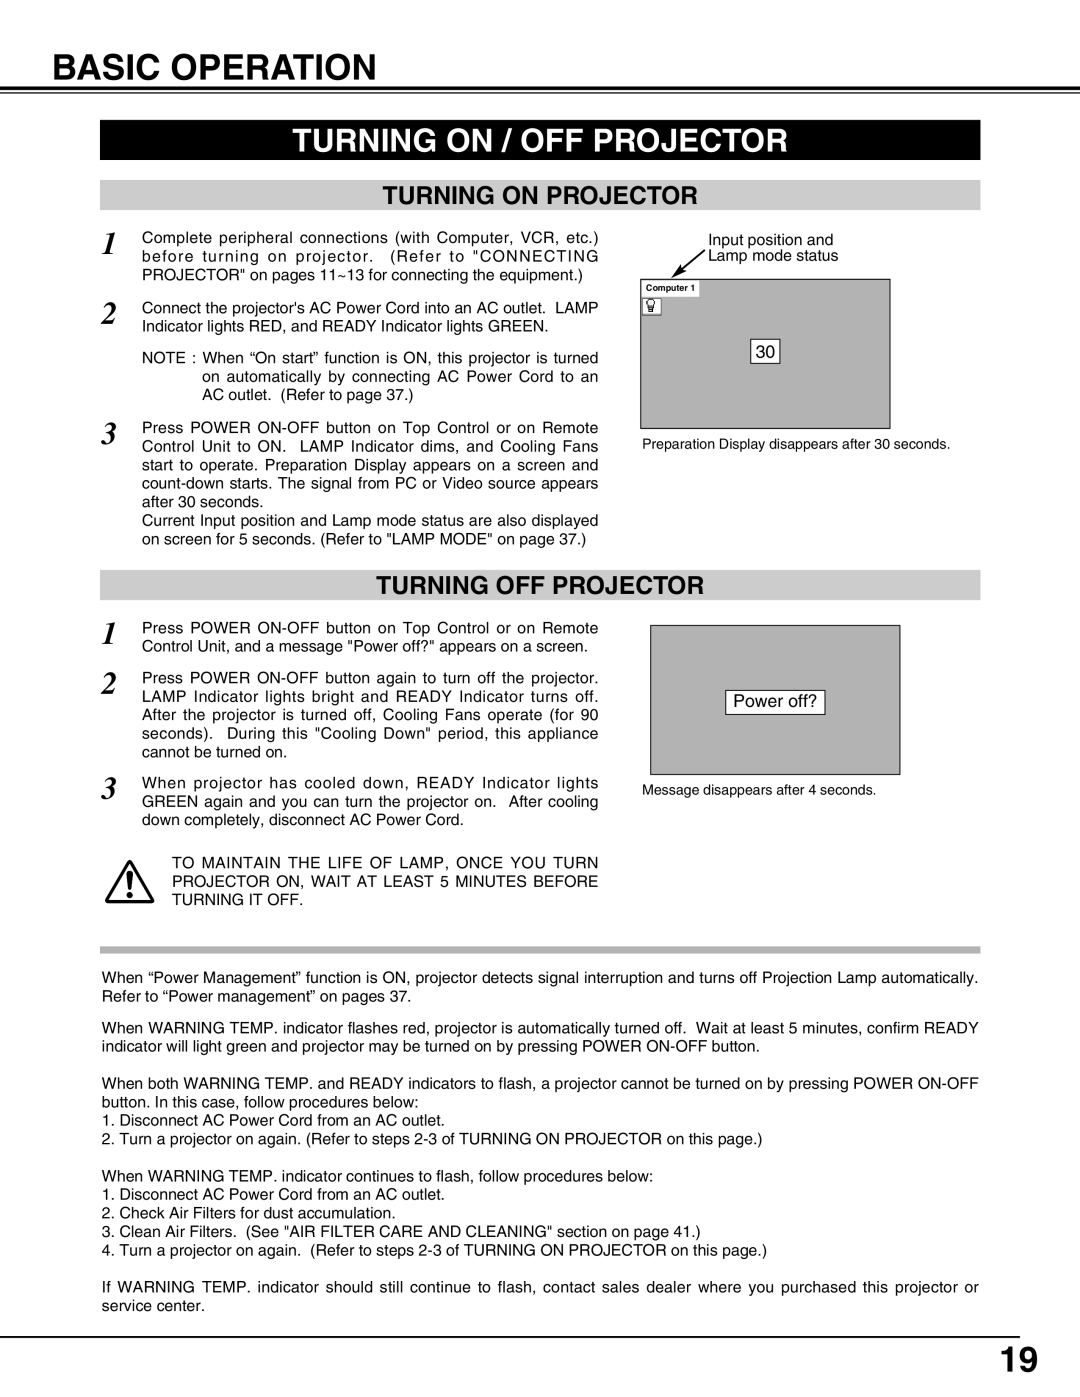 Sanyo PLC-XT10A owner manual Basic Operation, Turning On / Off Projector 